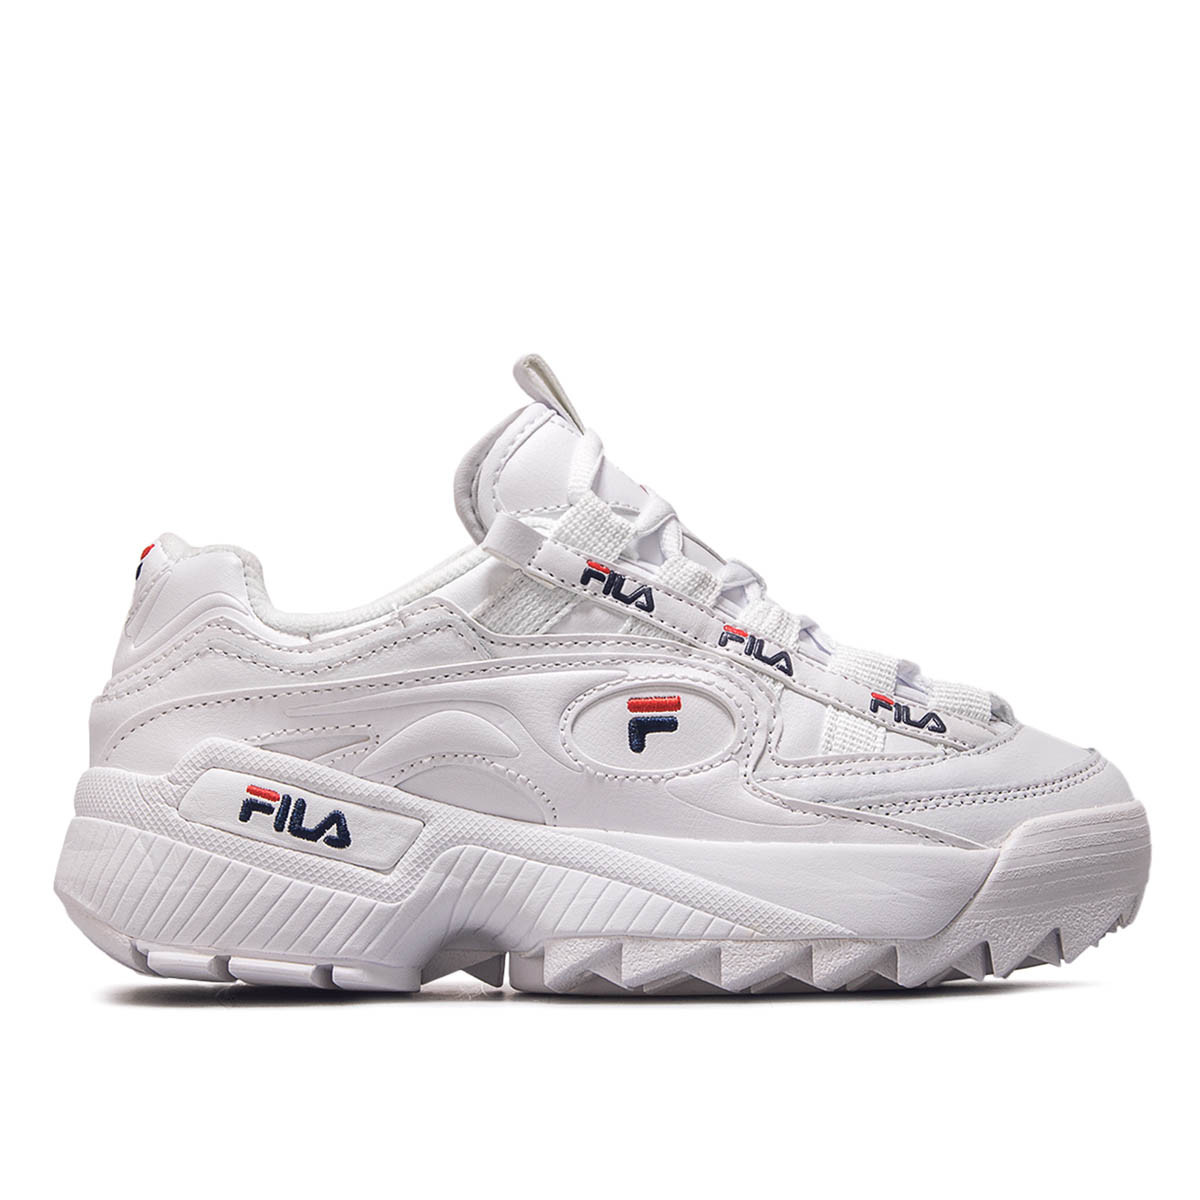 Fila Wmn D Formation White Navy Red